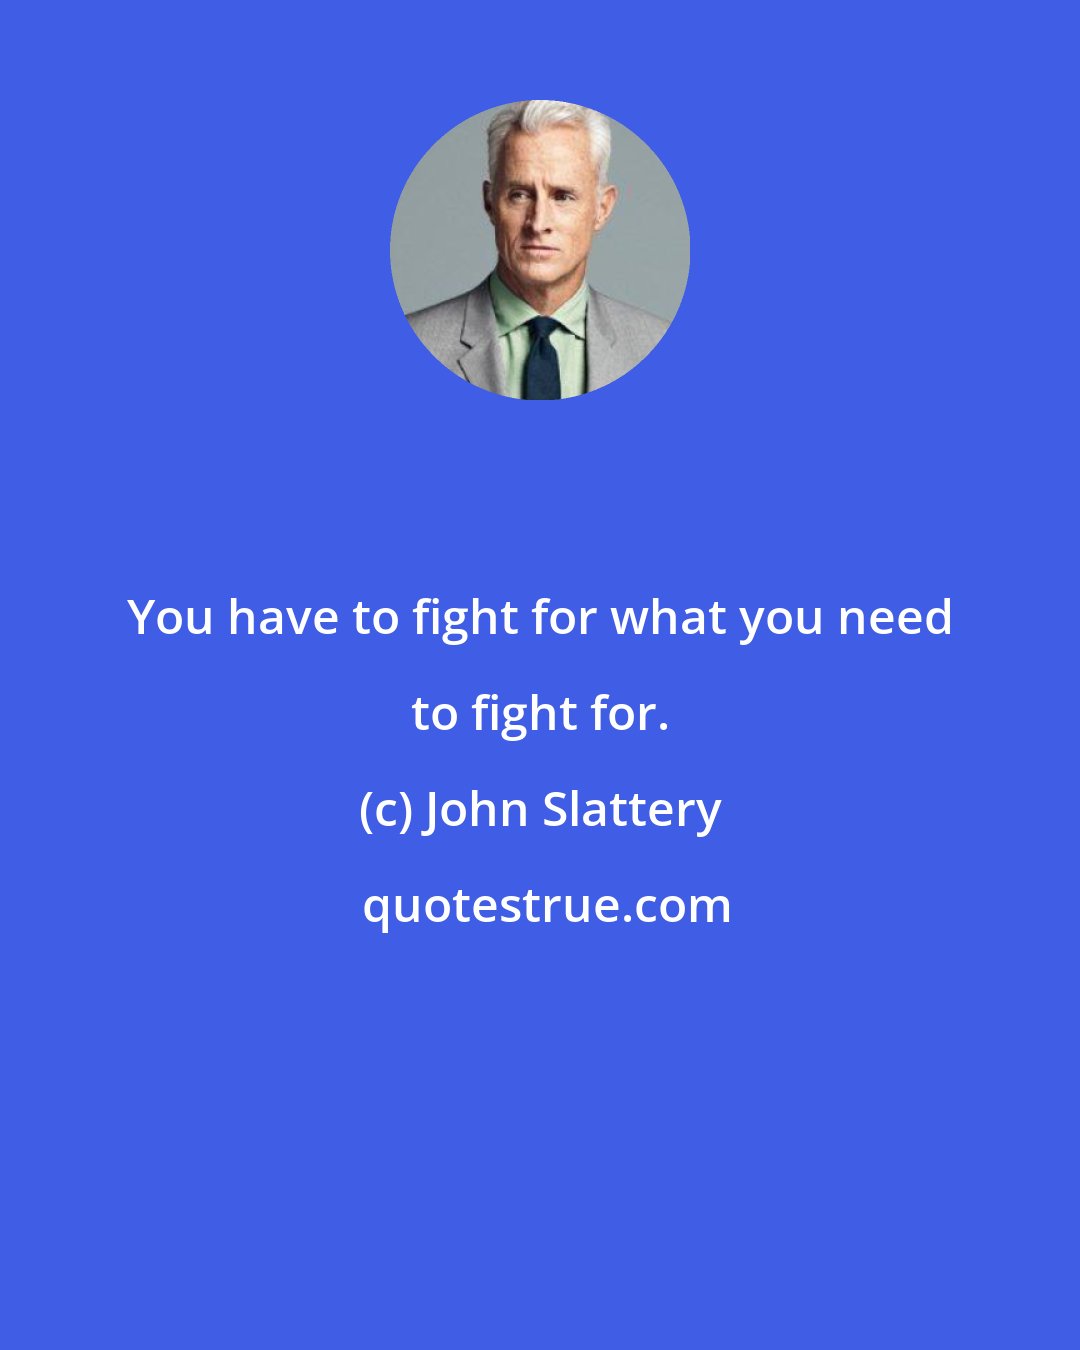 John Slattery: You have to fight for what you need to fight for.